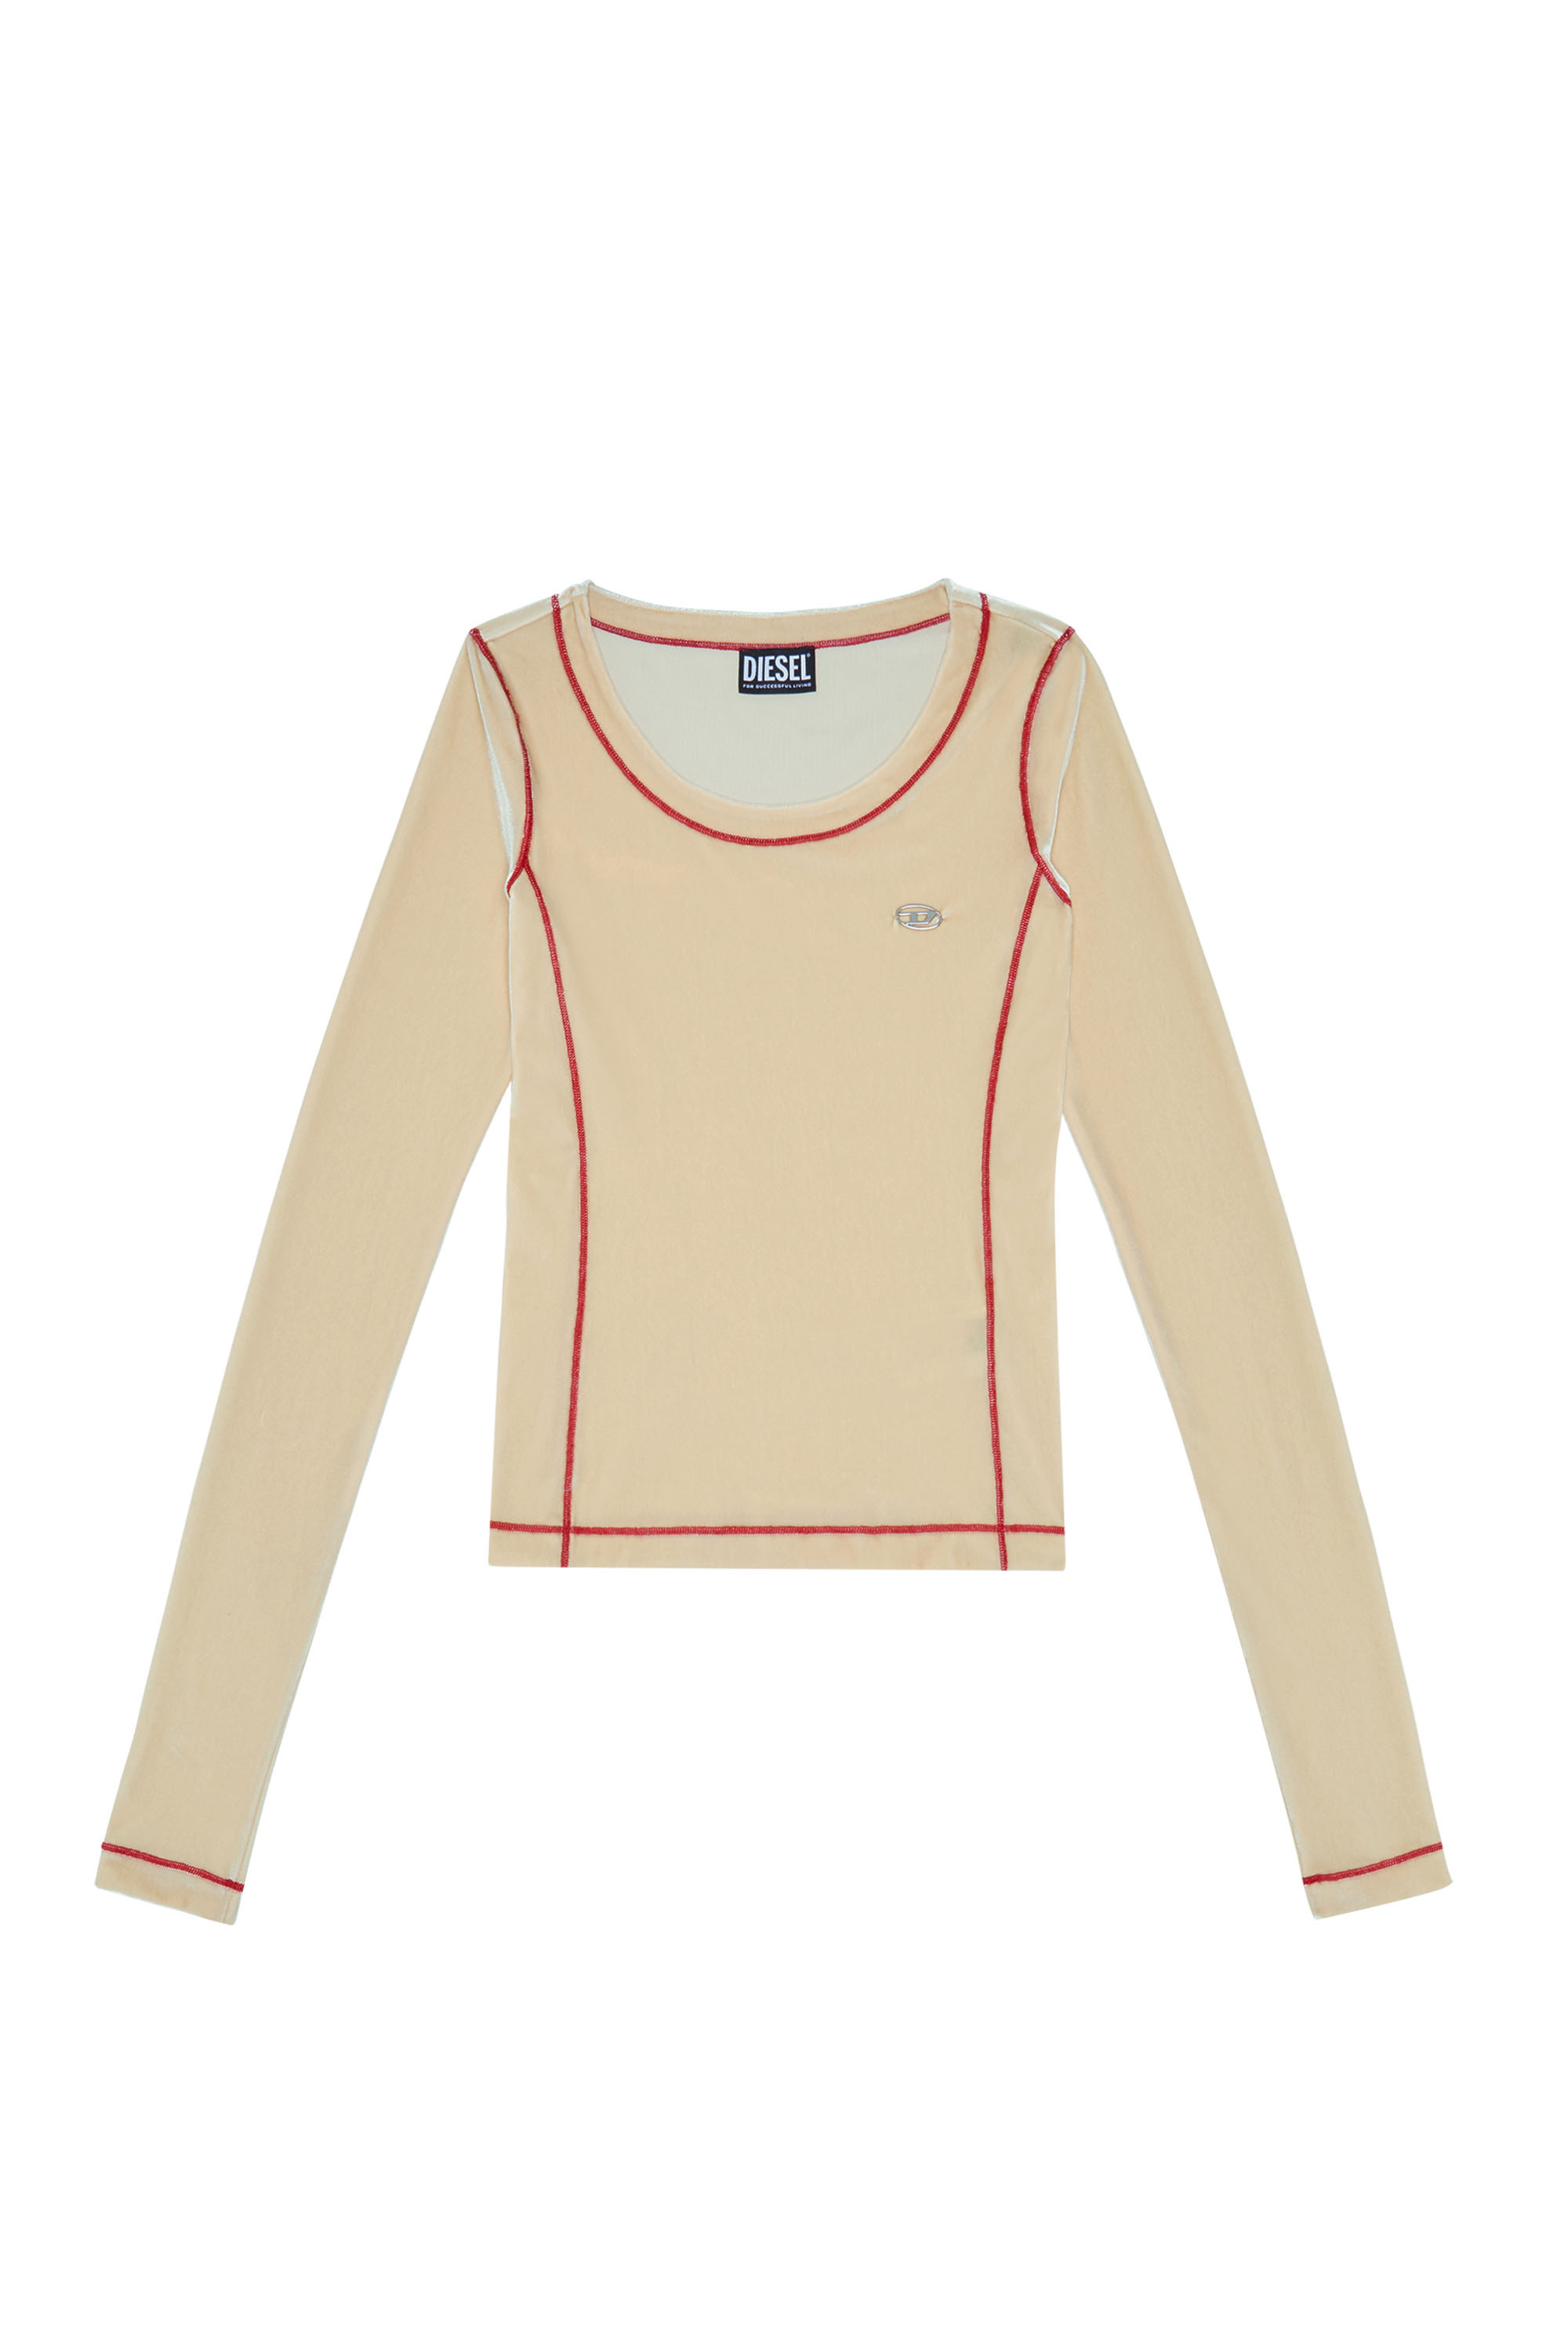 T-VELLY, Beige - Tops